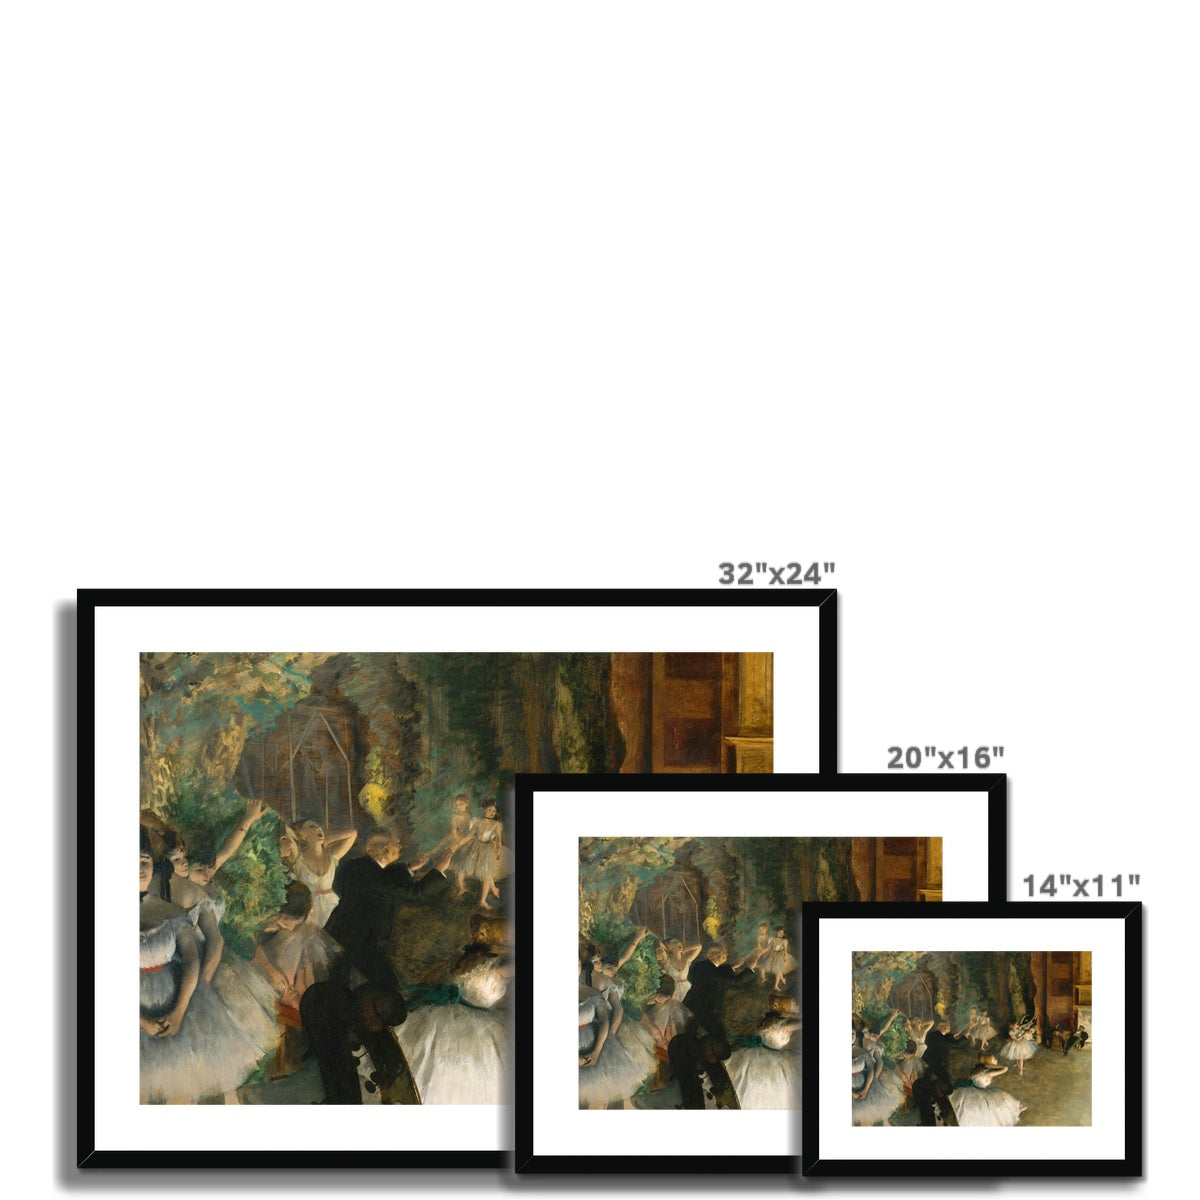 The Rehearsal of the Ballet Onstage by Edgar Degas. Framed Open Edition Fine Art Print. Historic Art